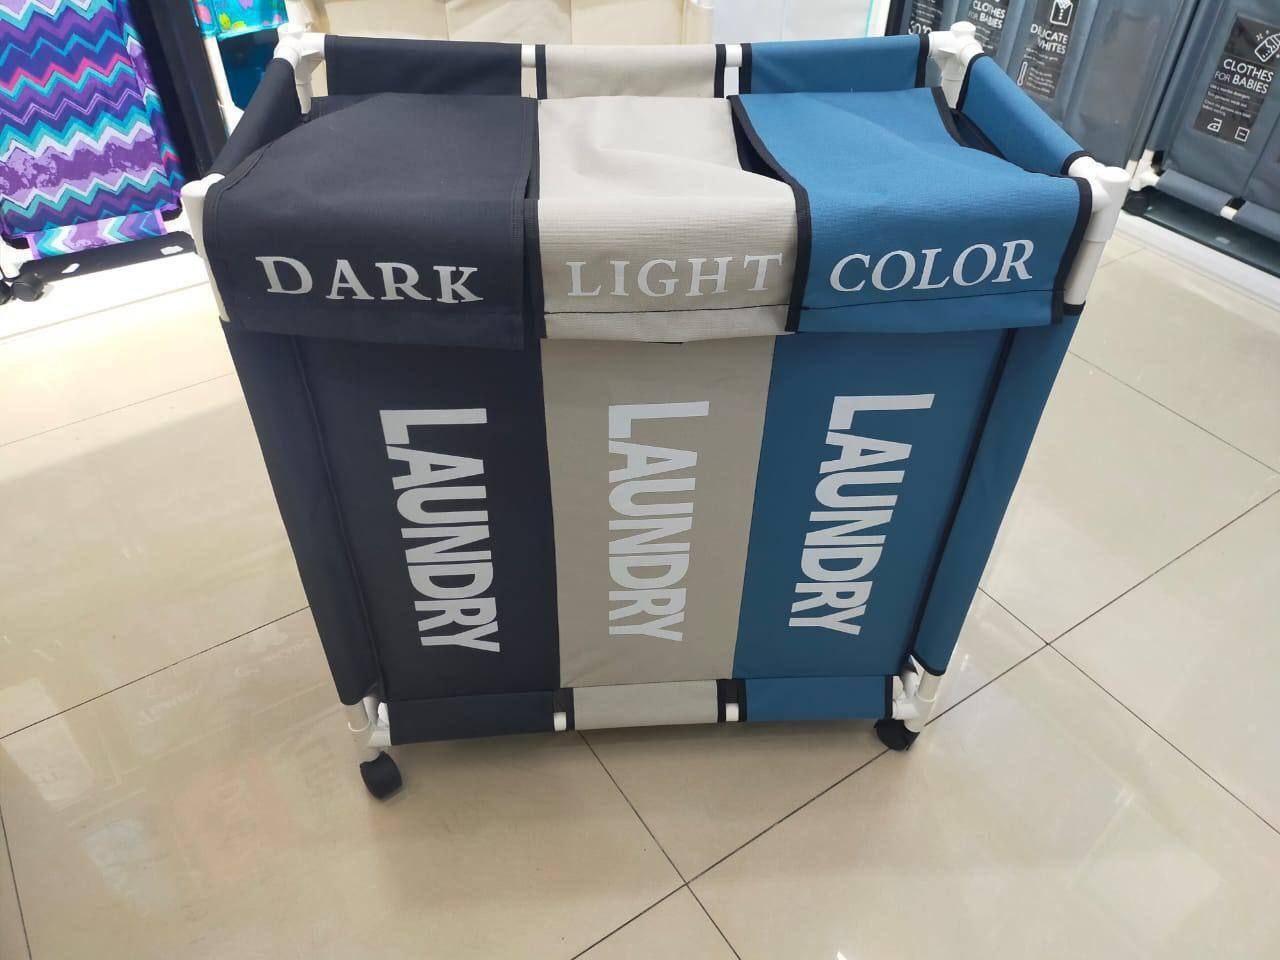 Dark, Light and Color Laundry Basket